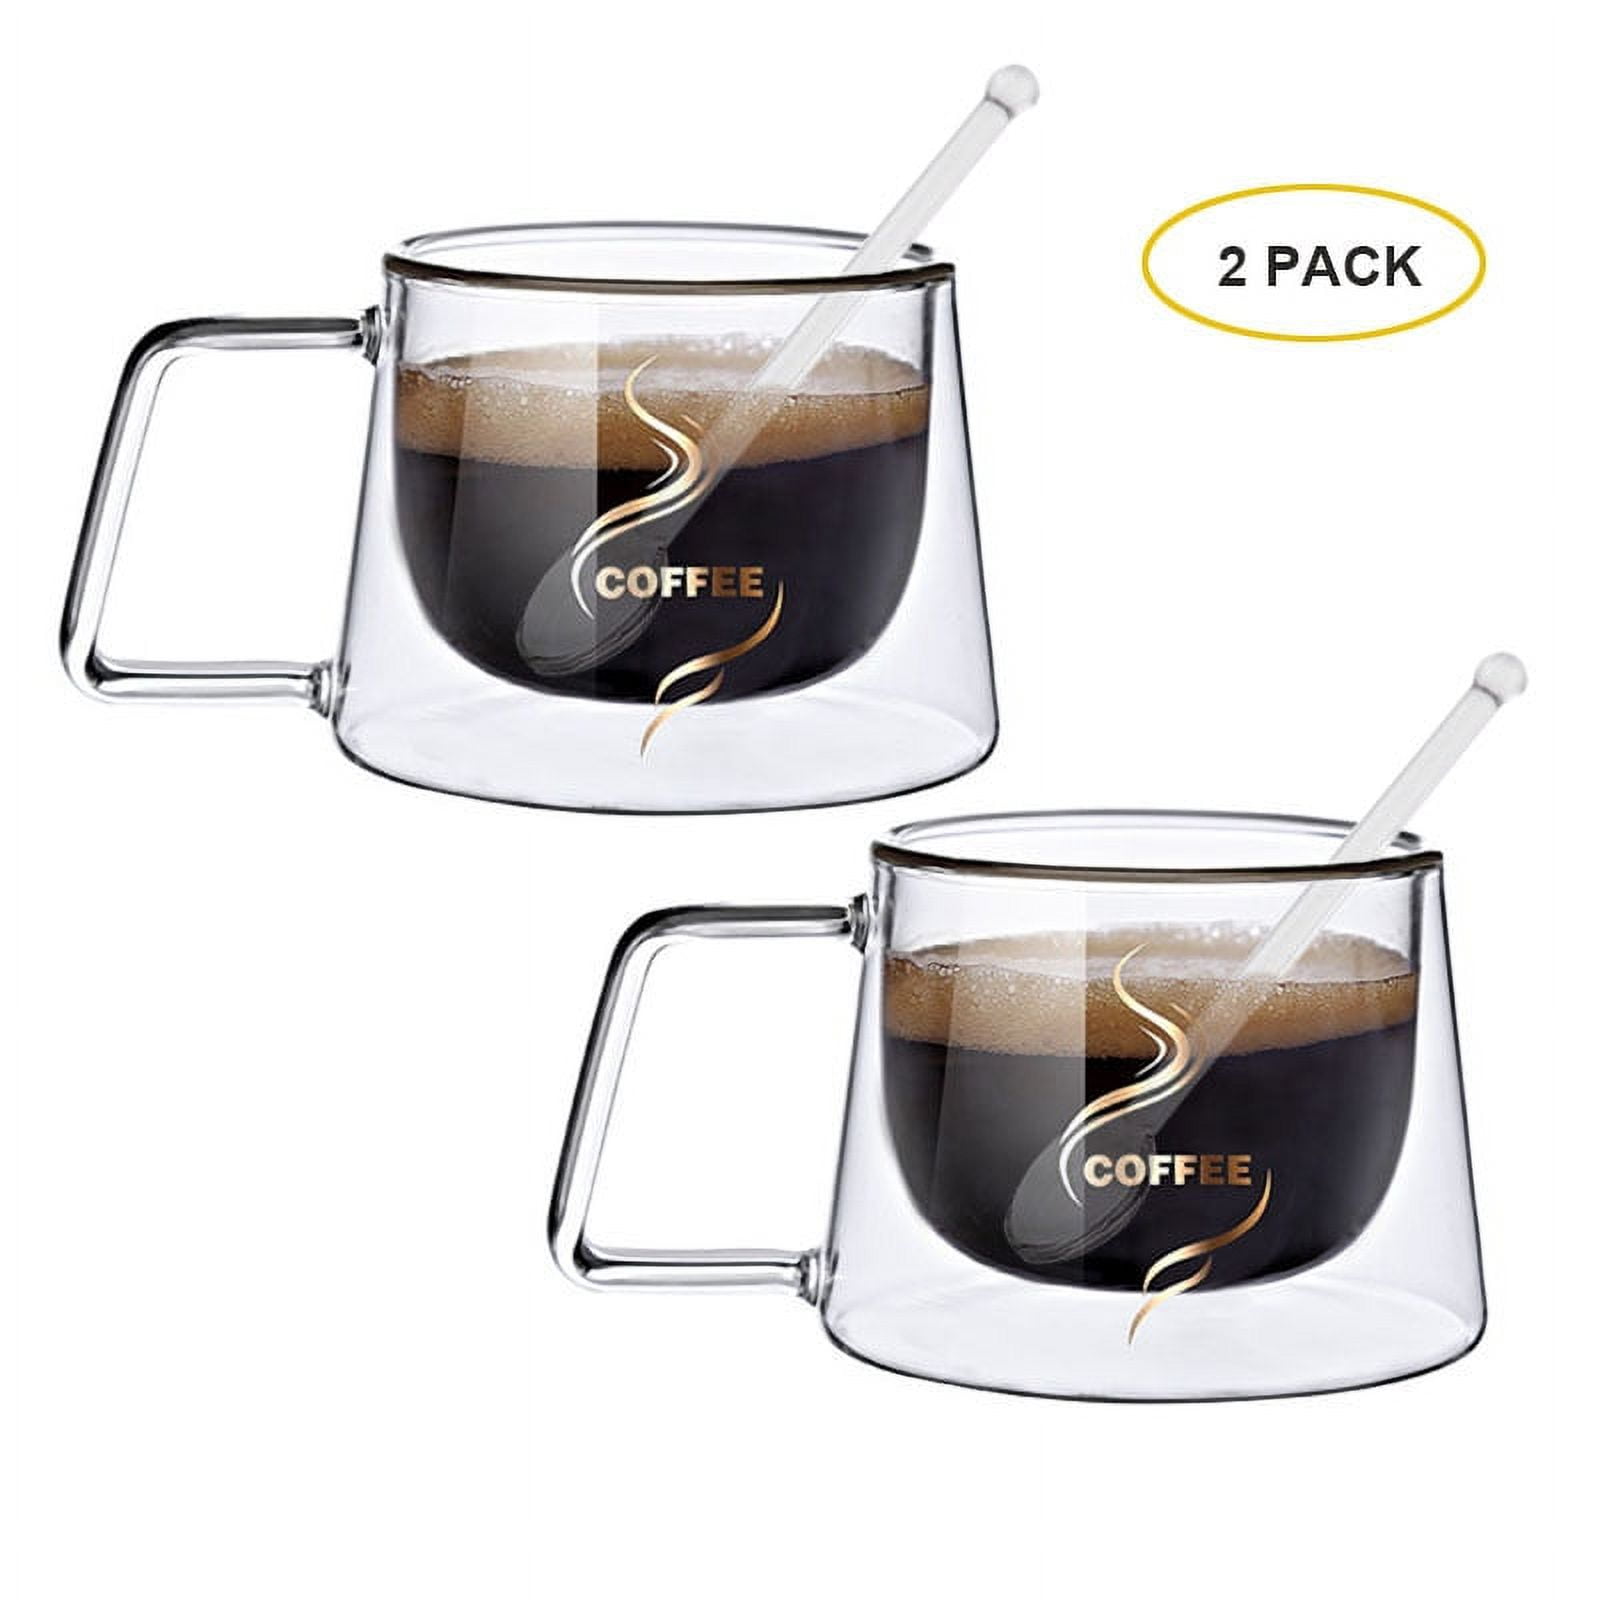 MEWAY 12oz/2 PACK Coffee Mugs,Clear Glass Double Wall Cup with handle for  Coffee, Tea, Latte, Cappuccino (12 oz，2)